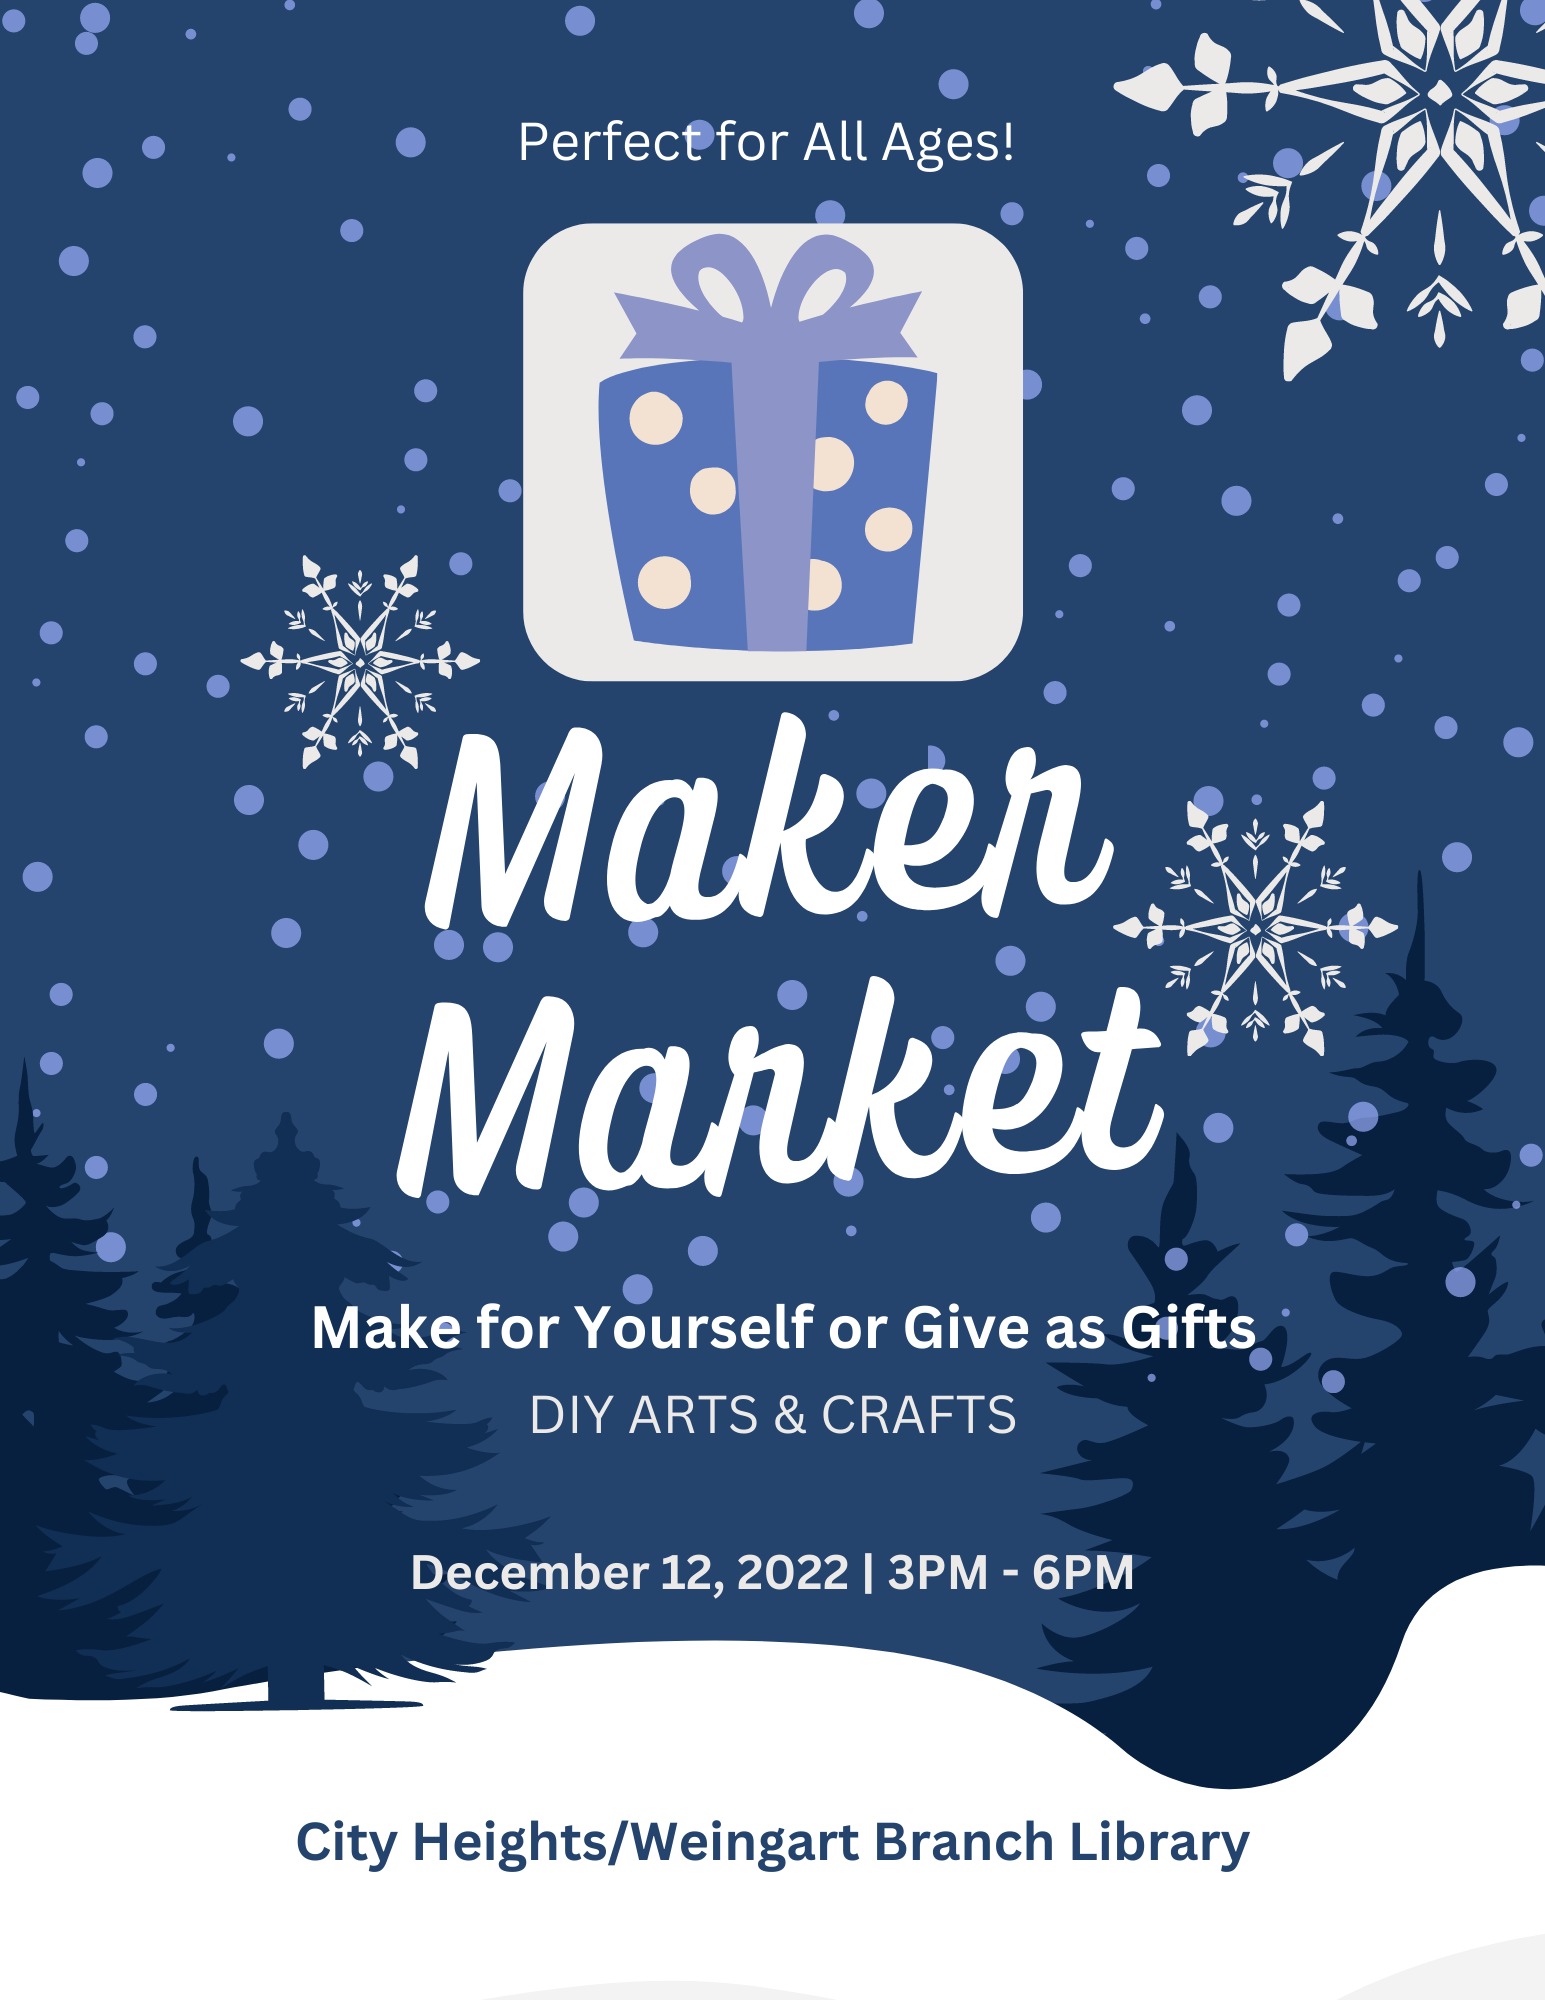 Maker Market | Make for Yourself or Give as Gifts | DIY Arts & Crafts | December 12, 2022 | 3:00 PM - 6:00 PM